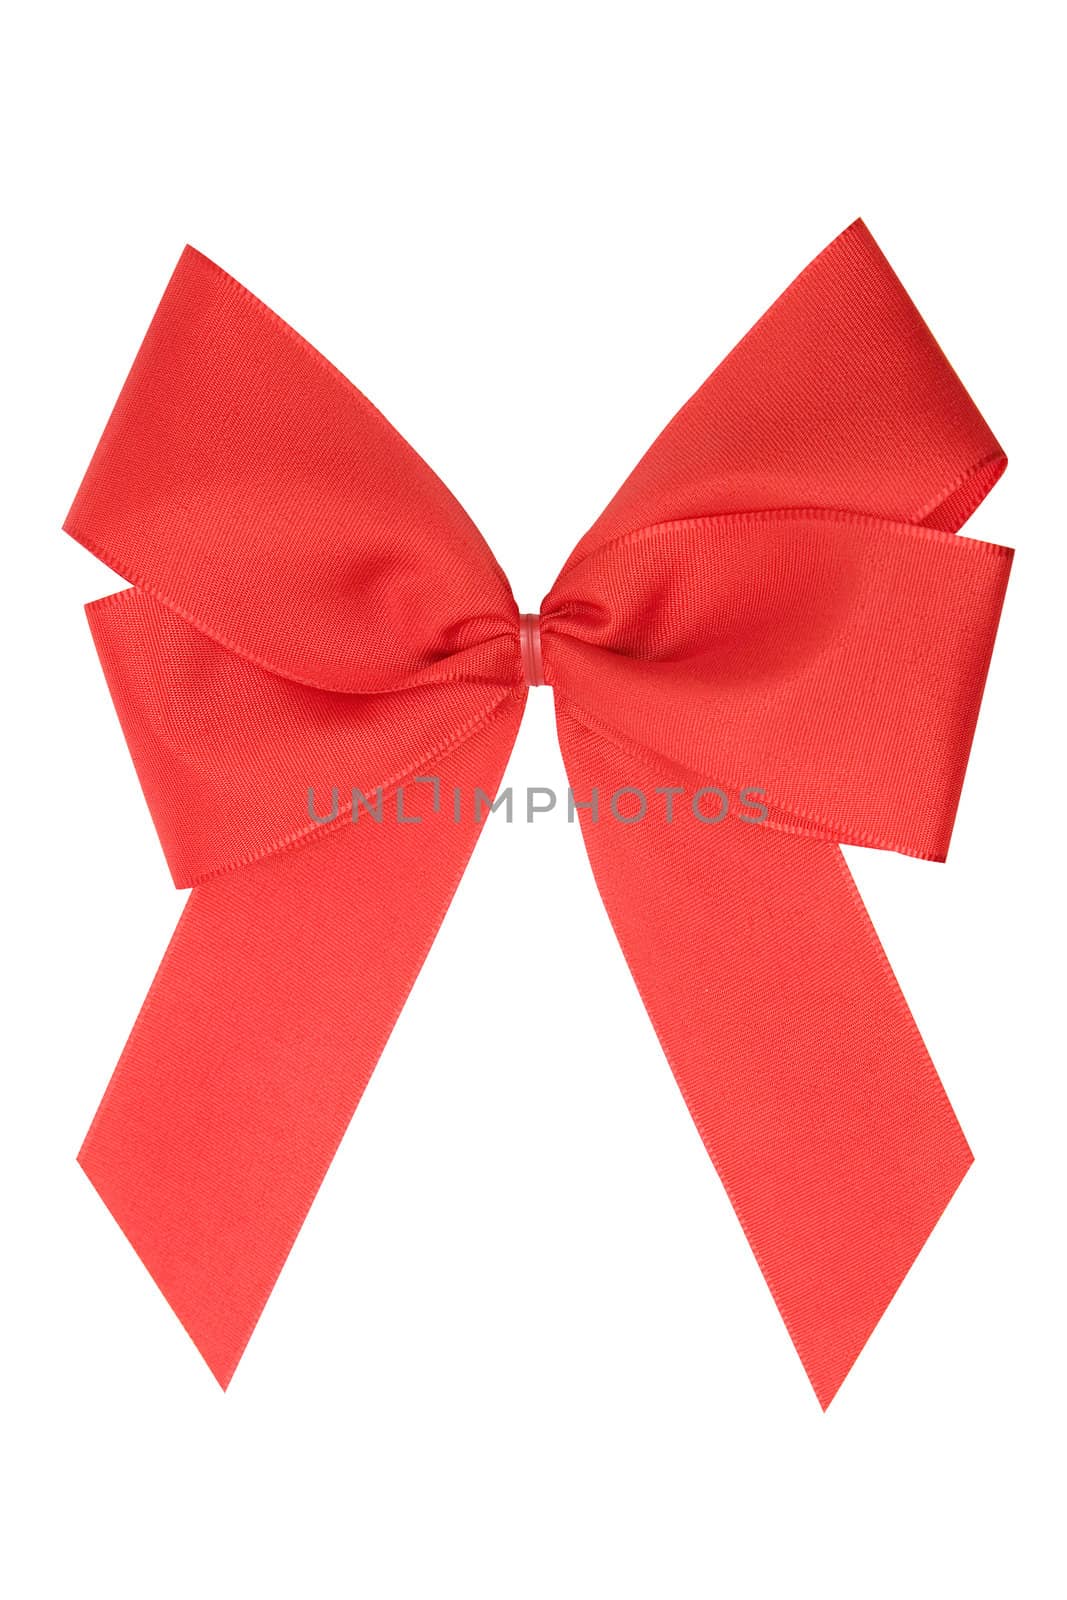 Red Ribbon with Clipping Path by winterling